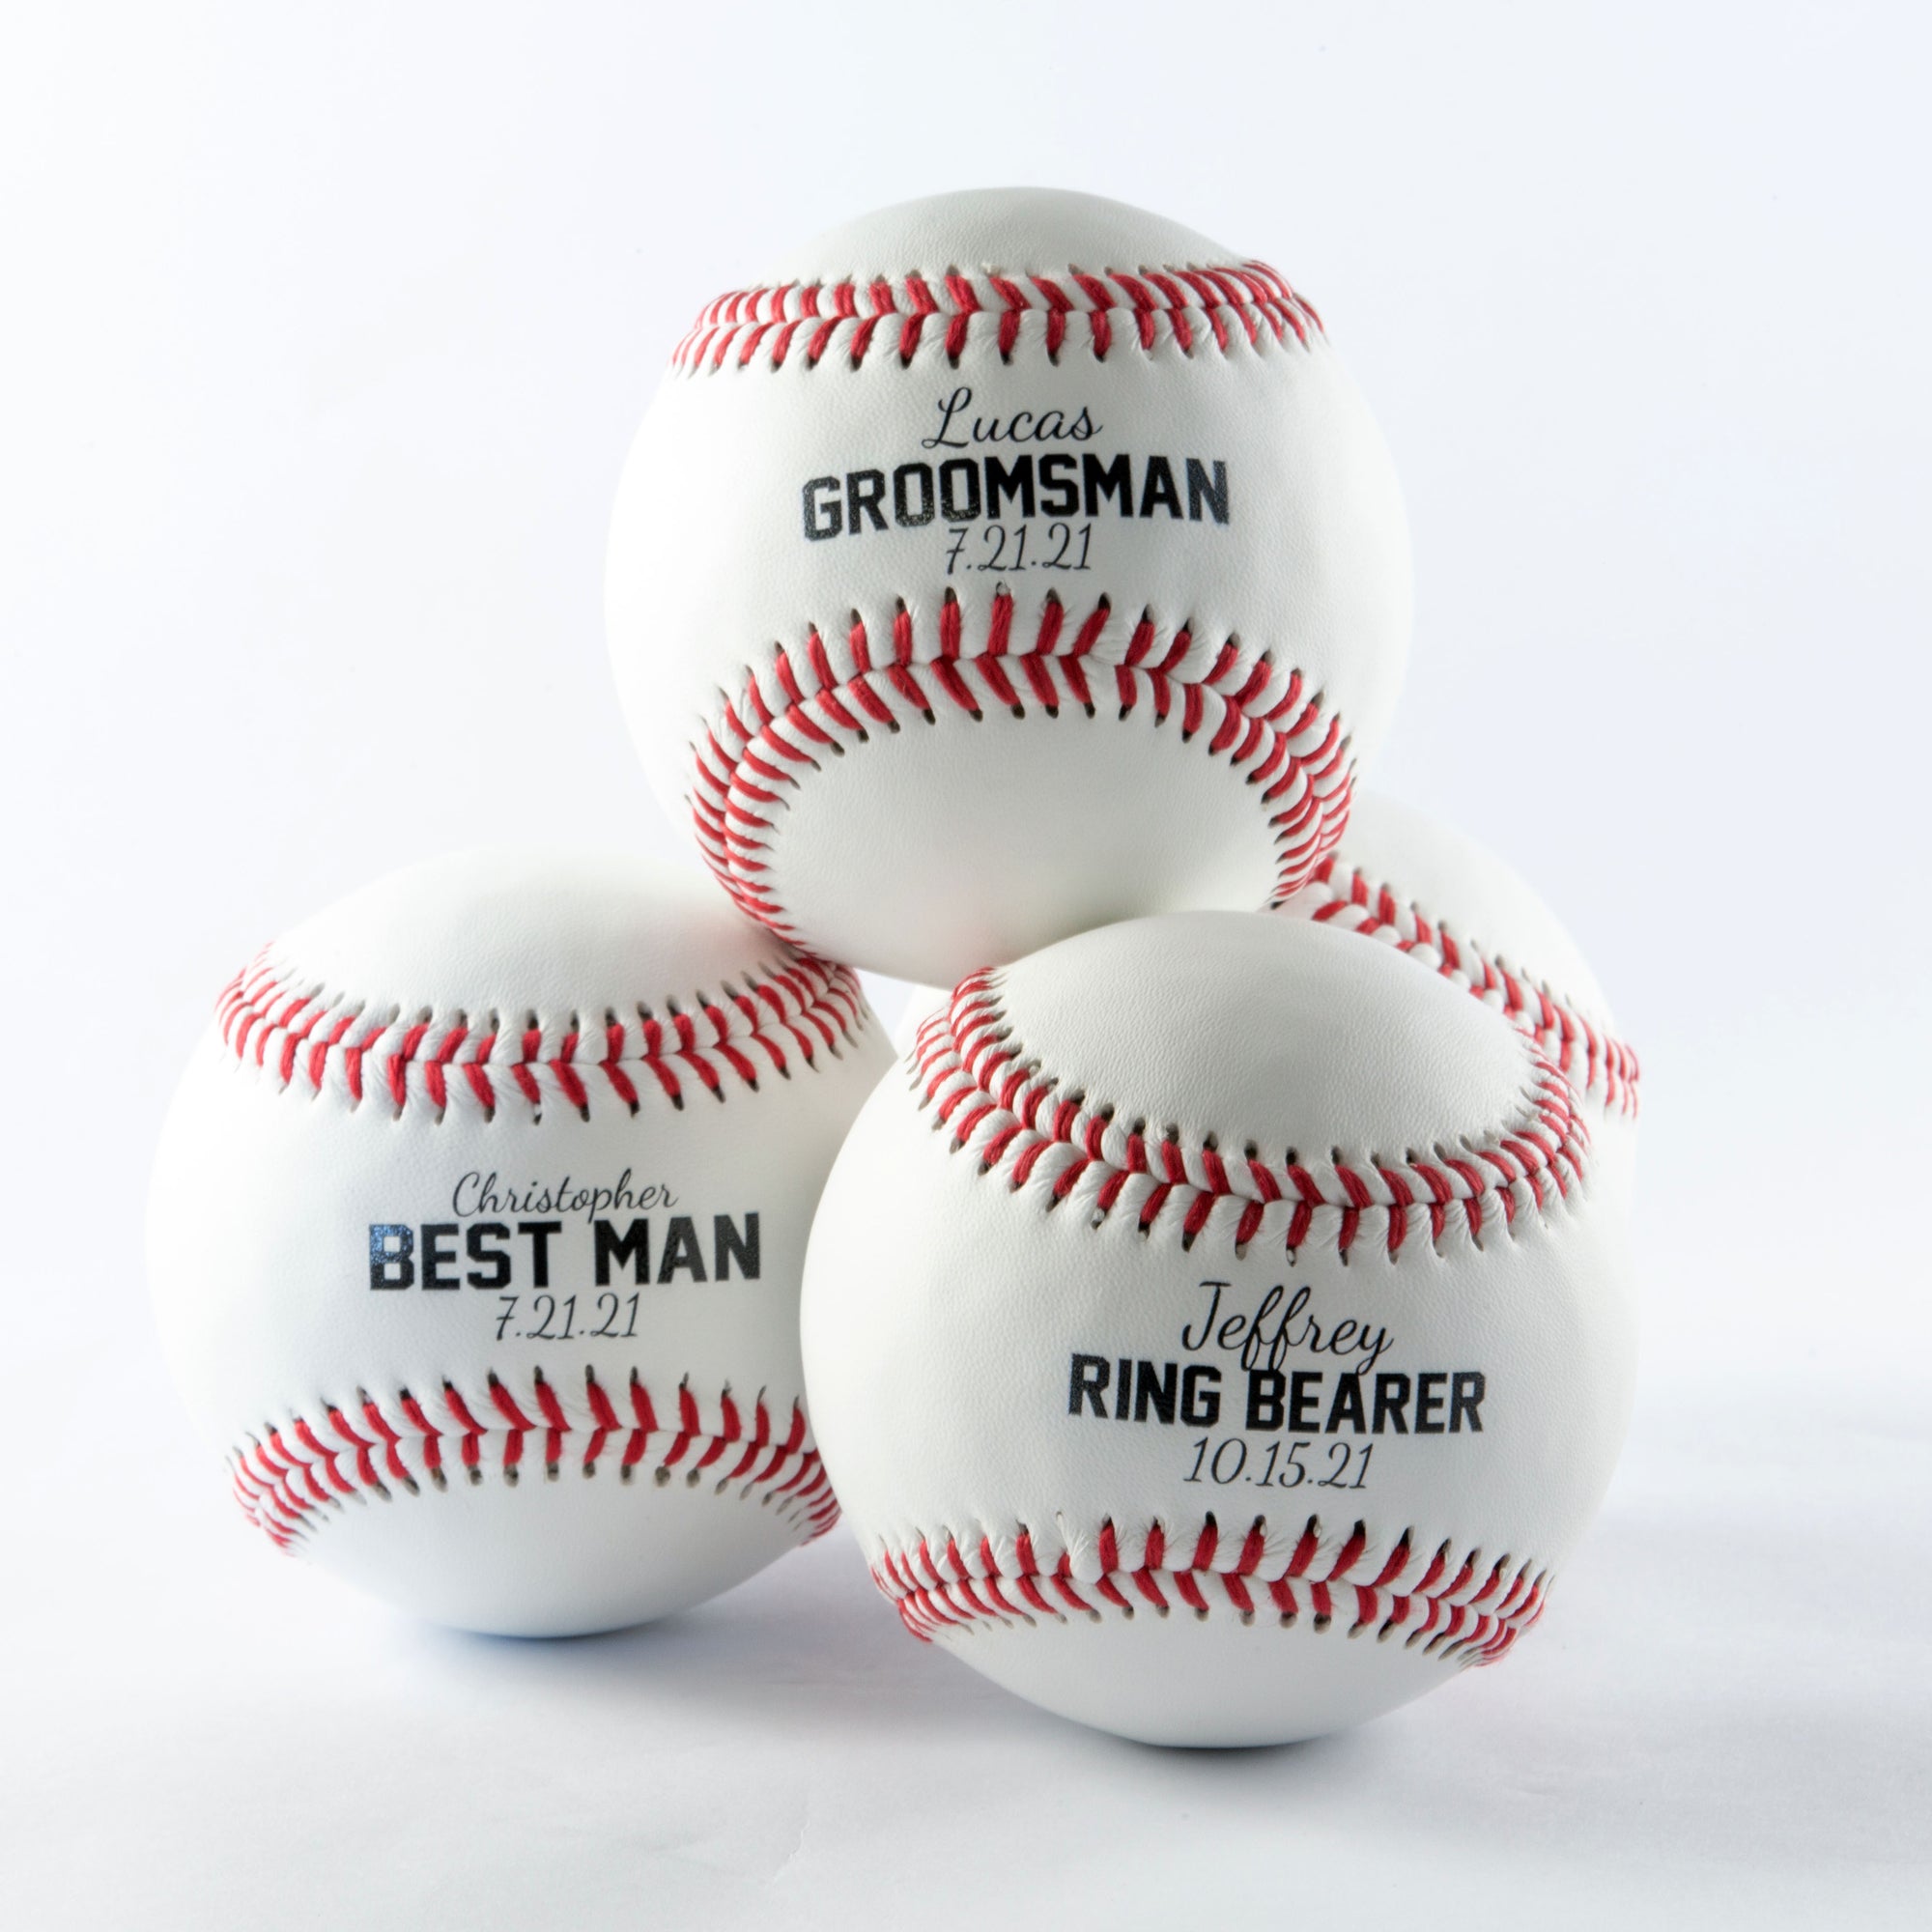 Wedding Party Gifts, Printed Baseball Between Laces